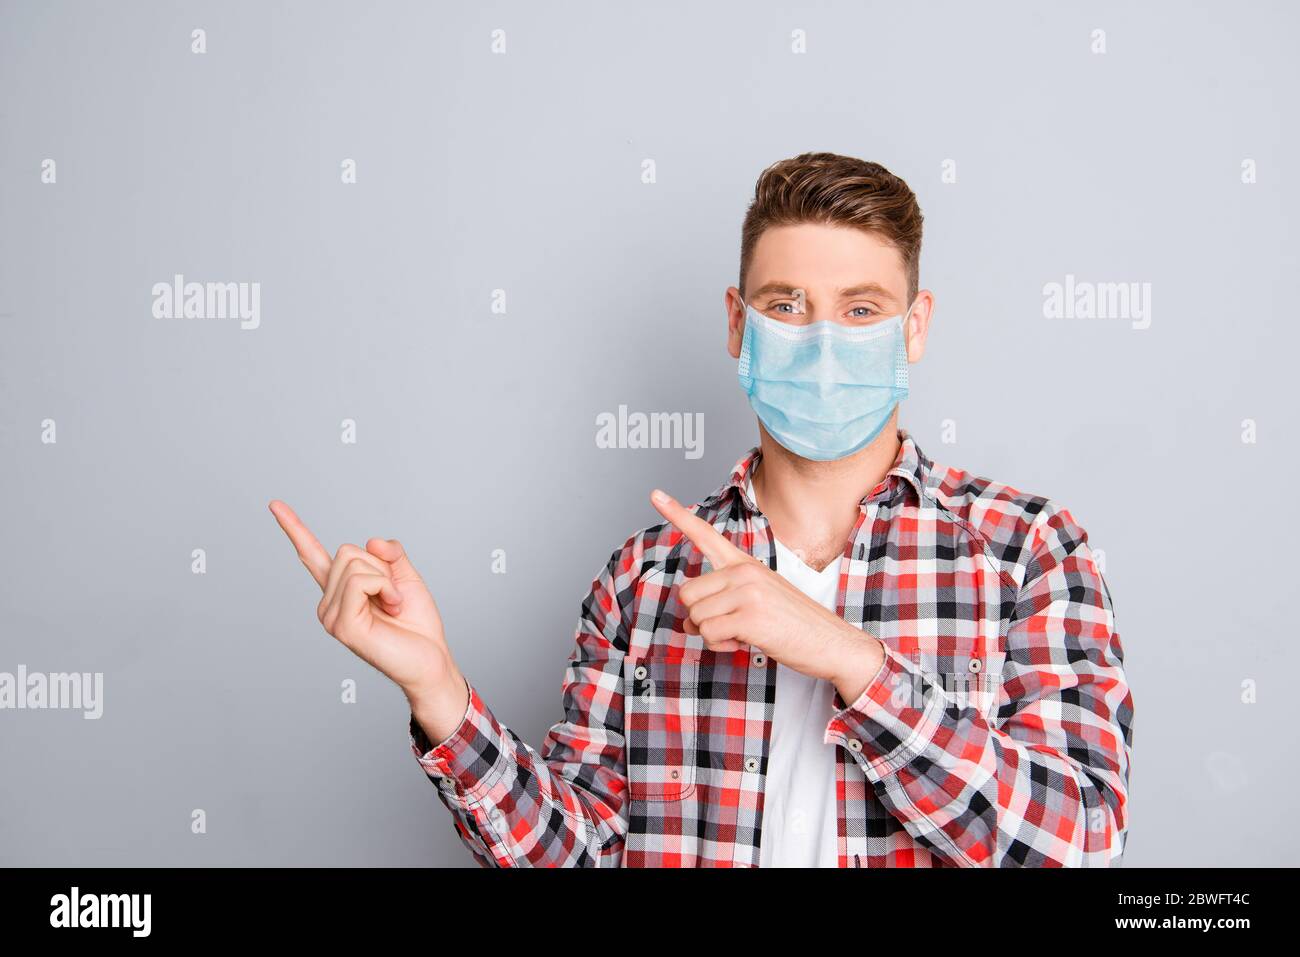 Cheerful young man pointing away wear medical safety mask on face showing data, stop pandemic corona virus prevention protection concept 2020 covid19 Stock Photo